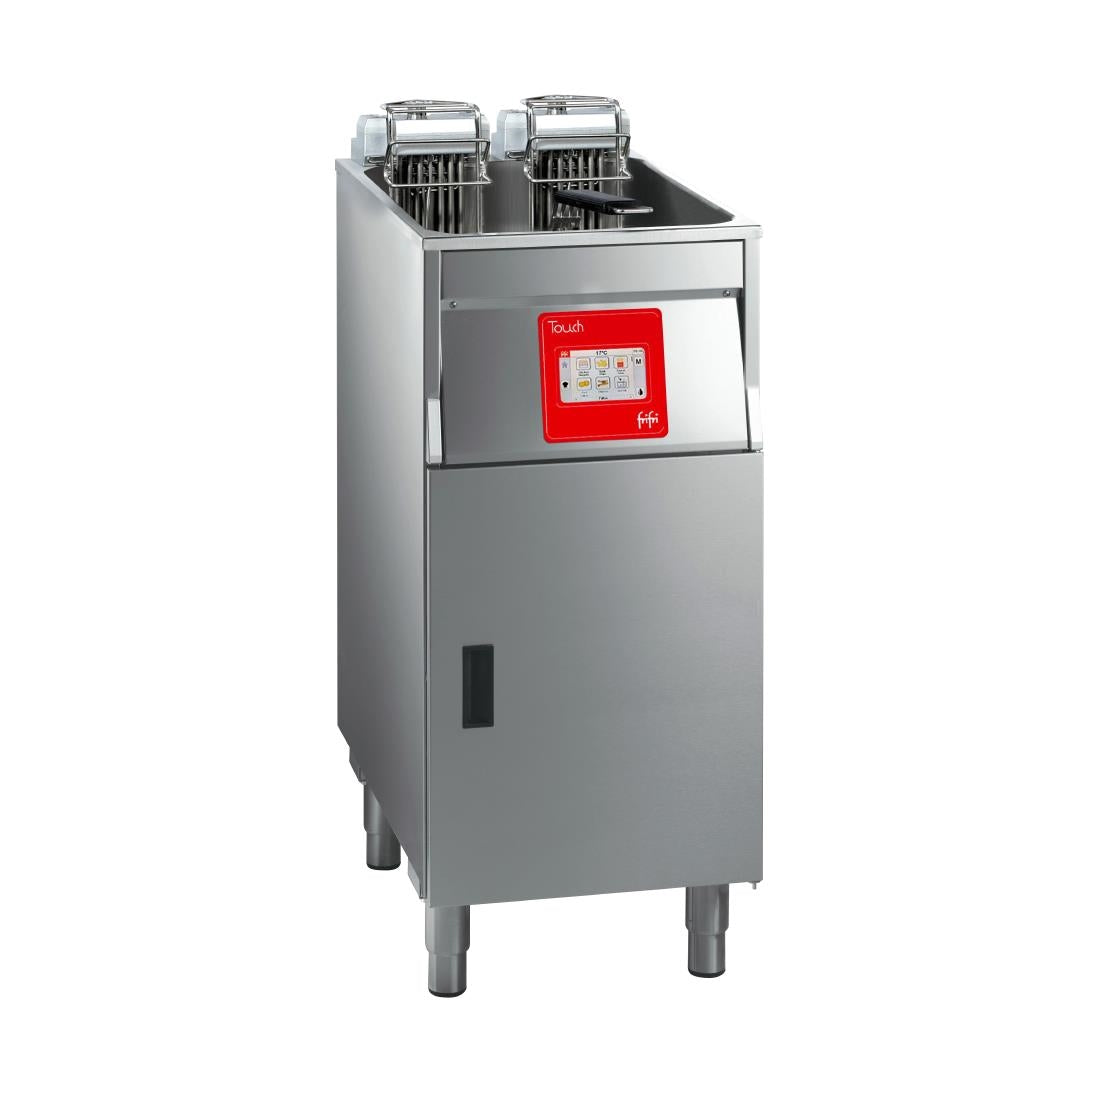 HS006-3PH FriFri Touch 411 Electric Free-Standing Single Tank Fryer 1 Basket 15kW - Three Phase